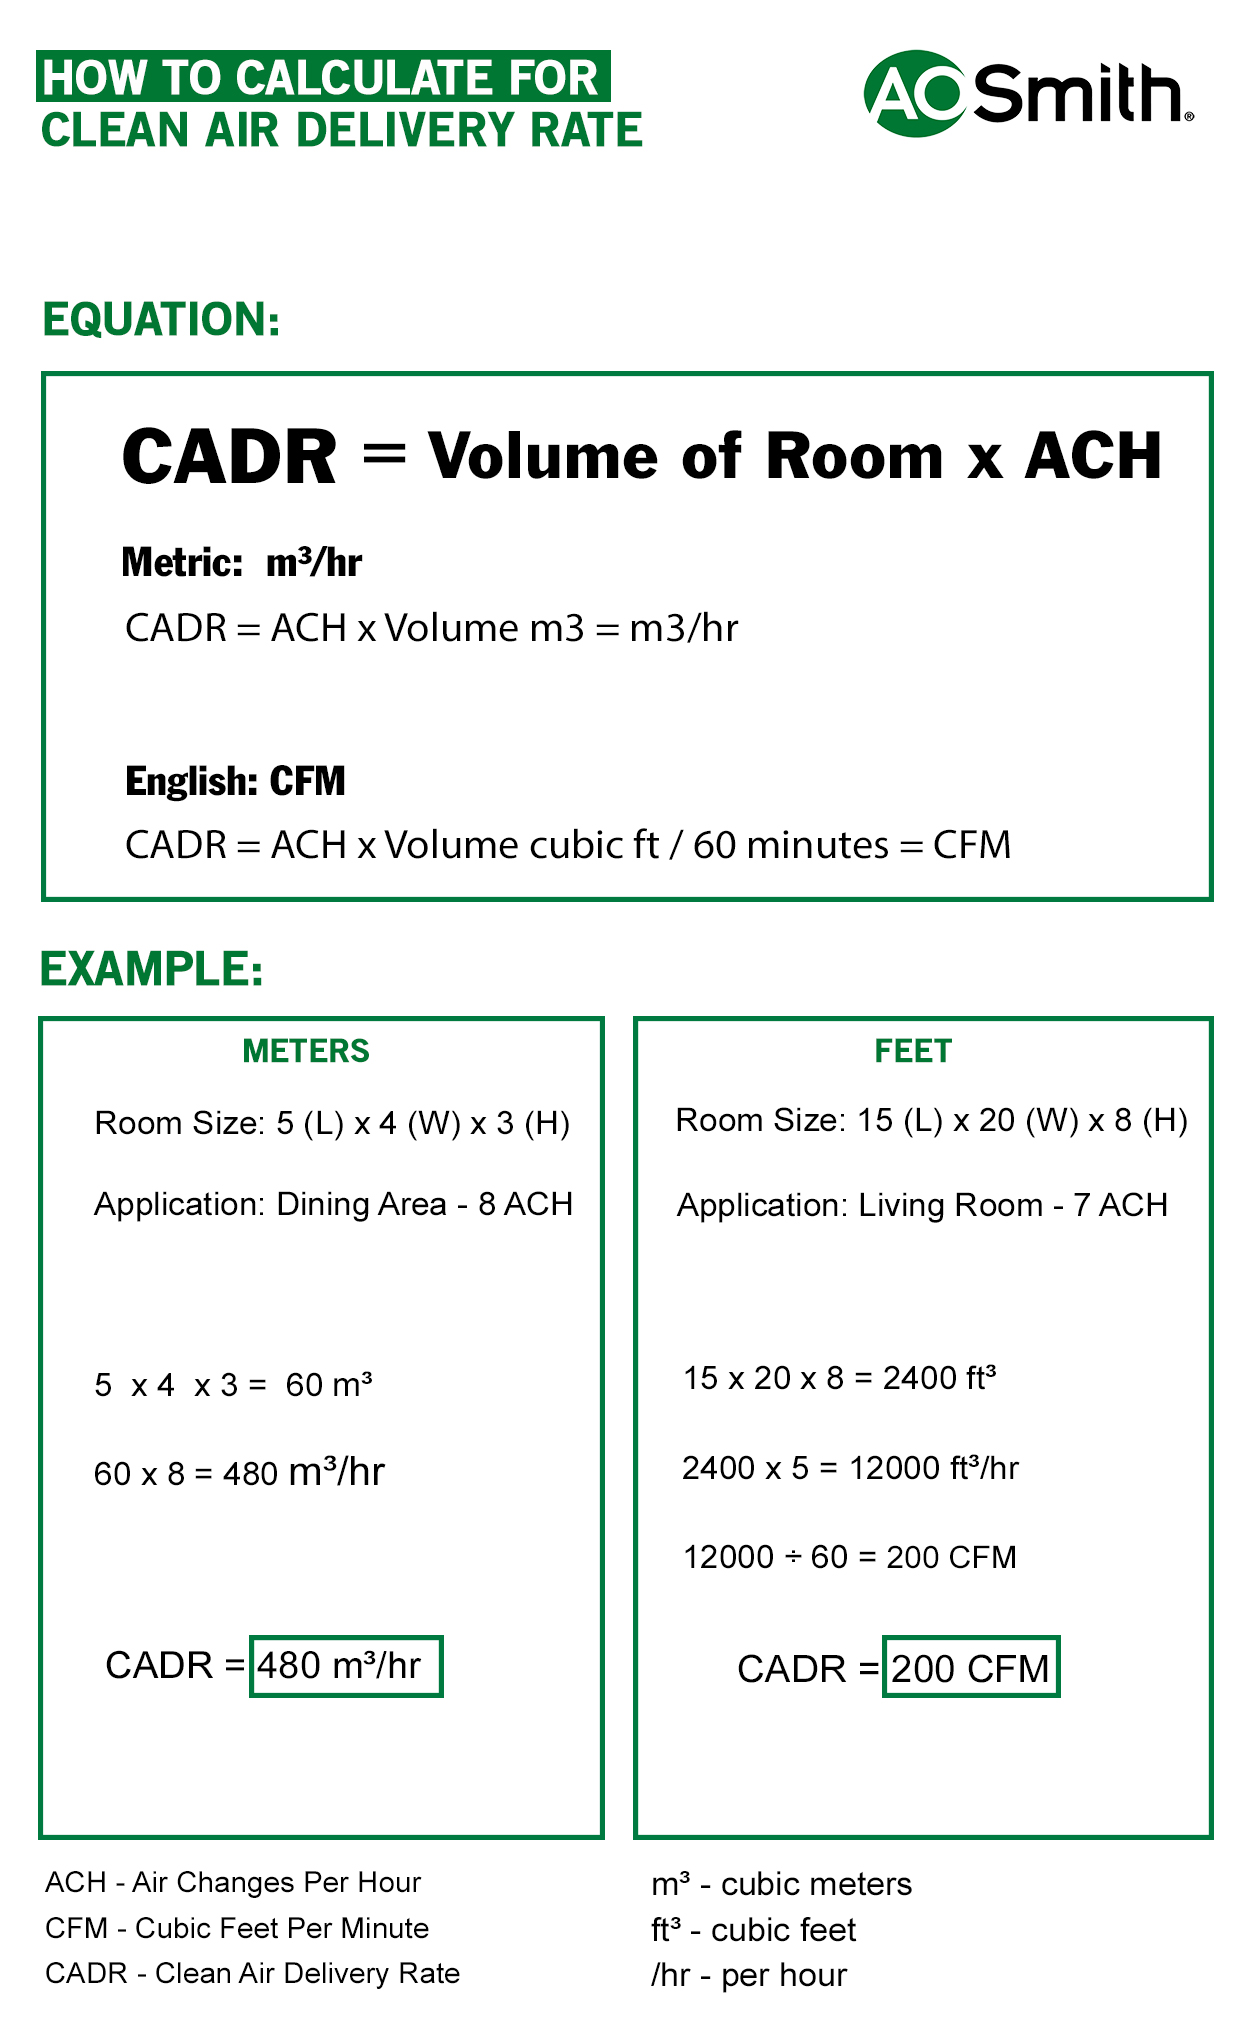 CADR Clean Air Delivery Rate Equation